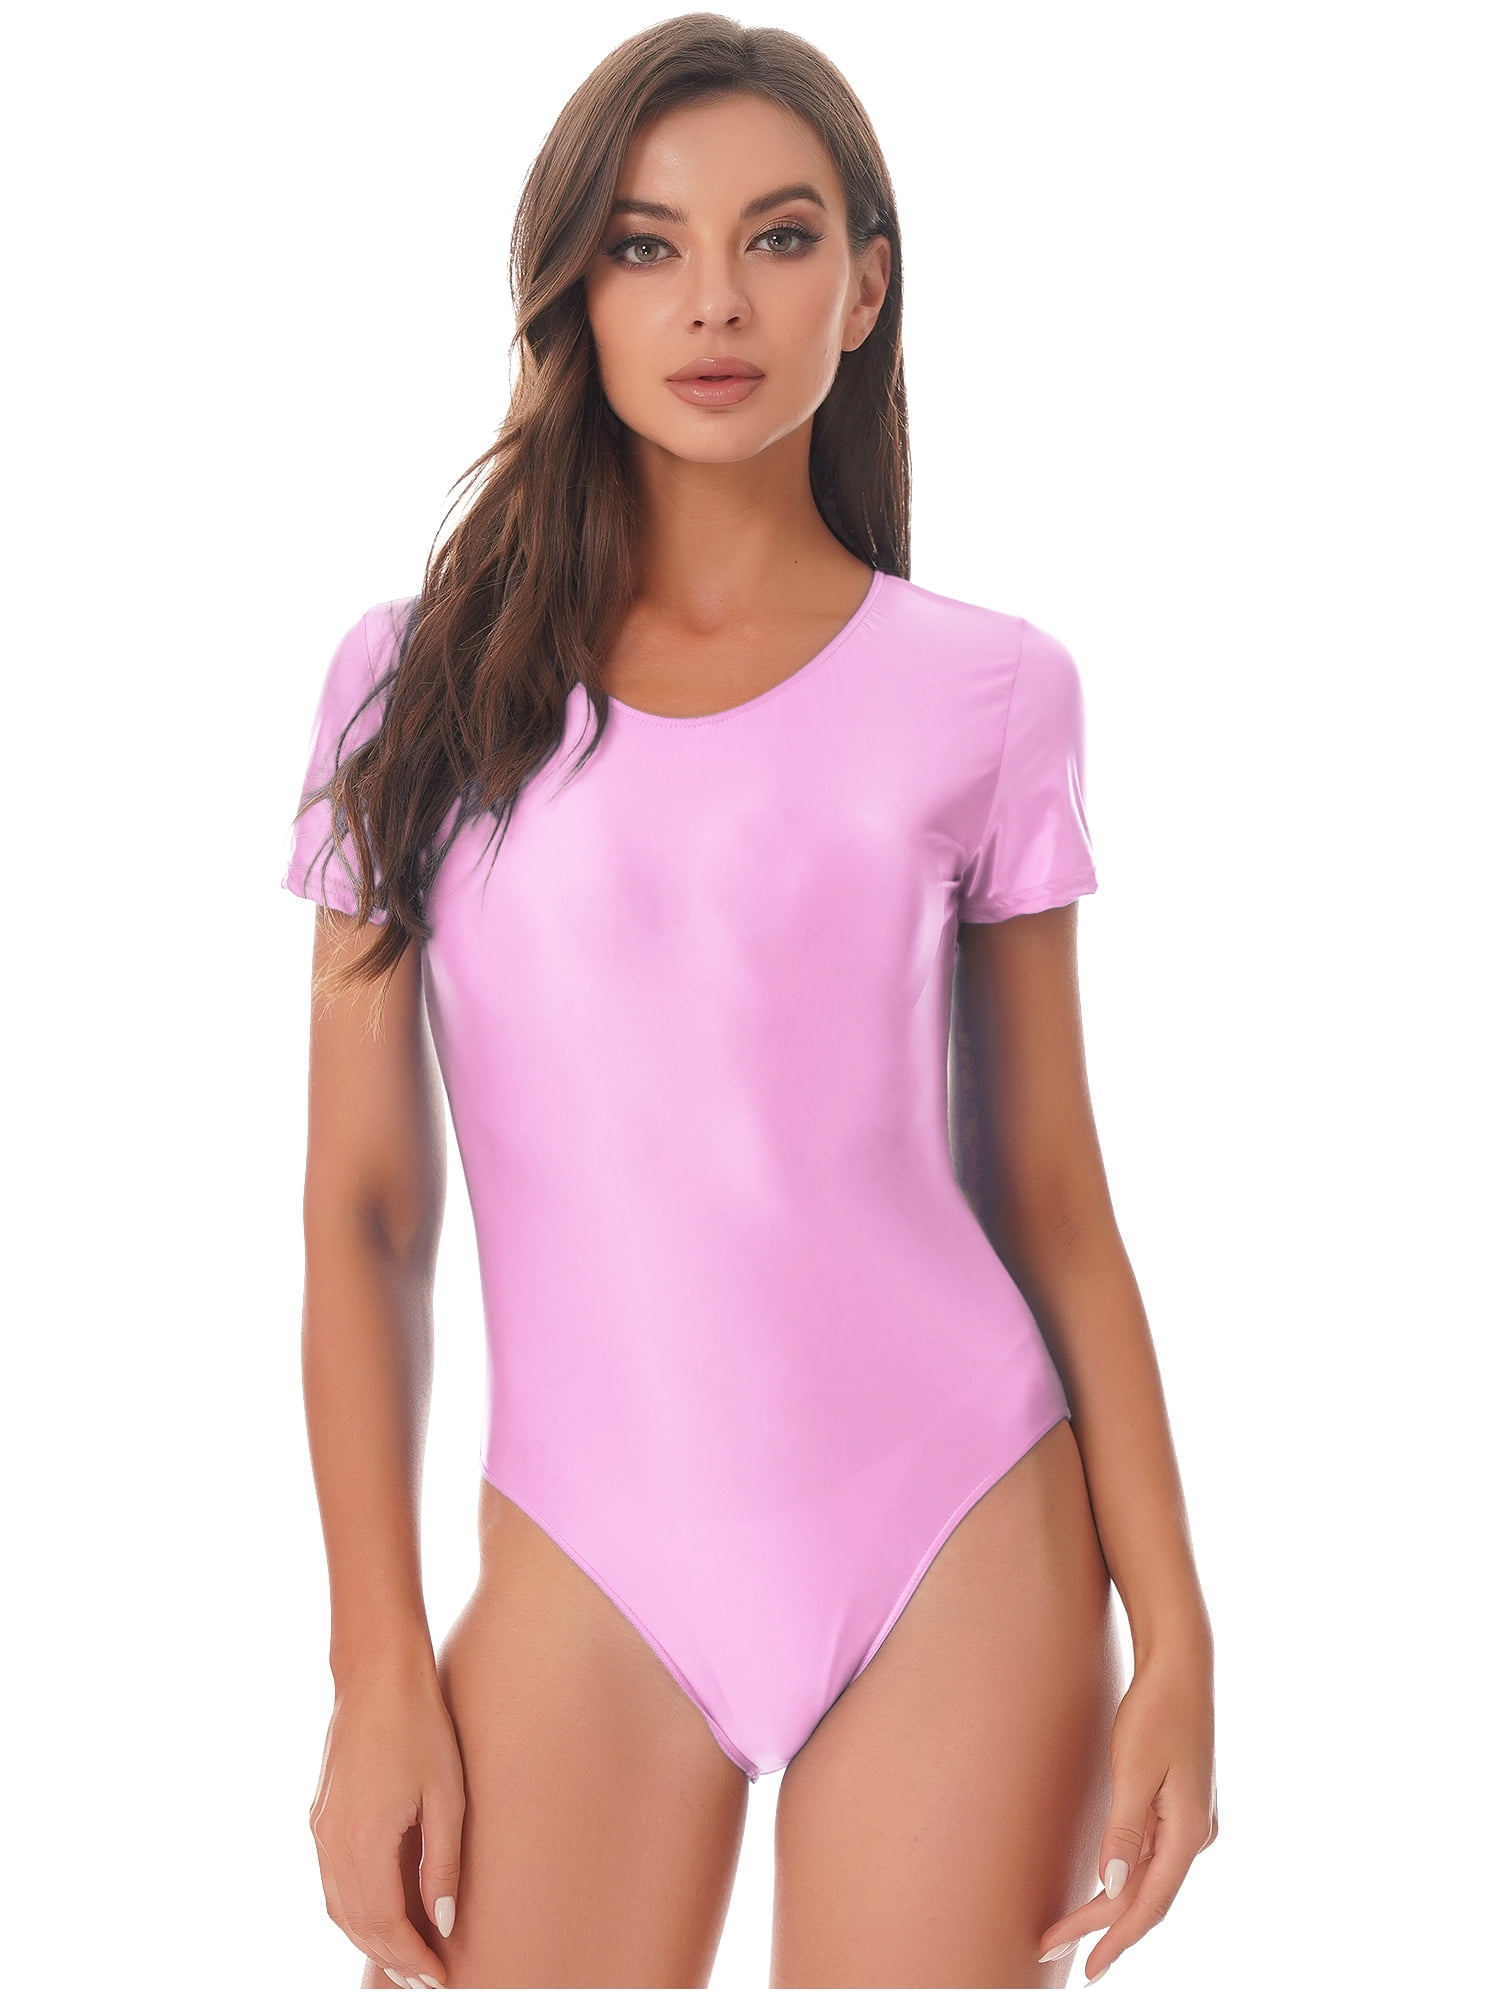 YEAHDOR Womens Glossy High Cut Thong Swimsuit One Piece Bodysuit Bathing  Suit Pink XL 